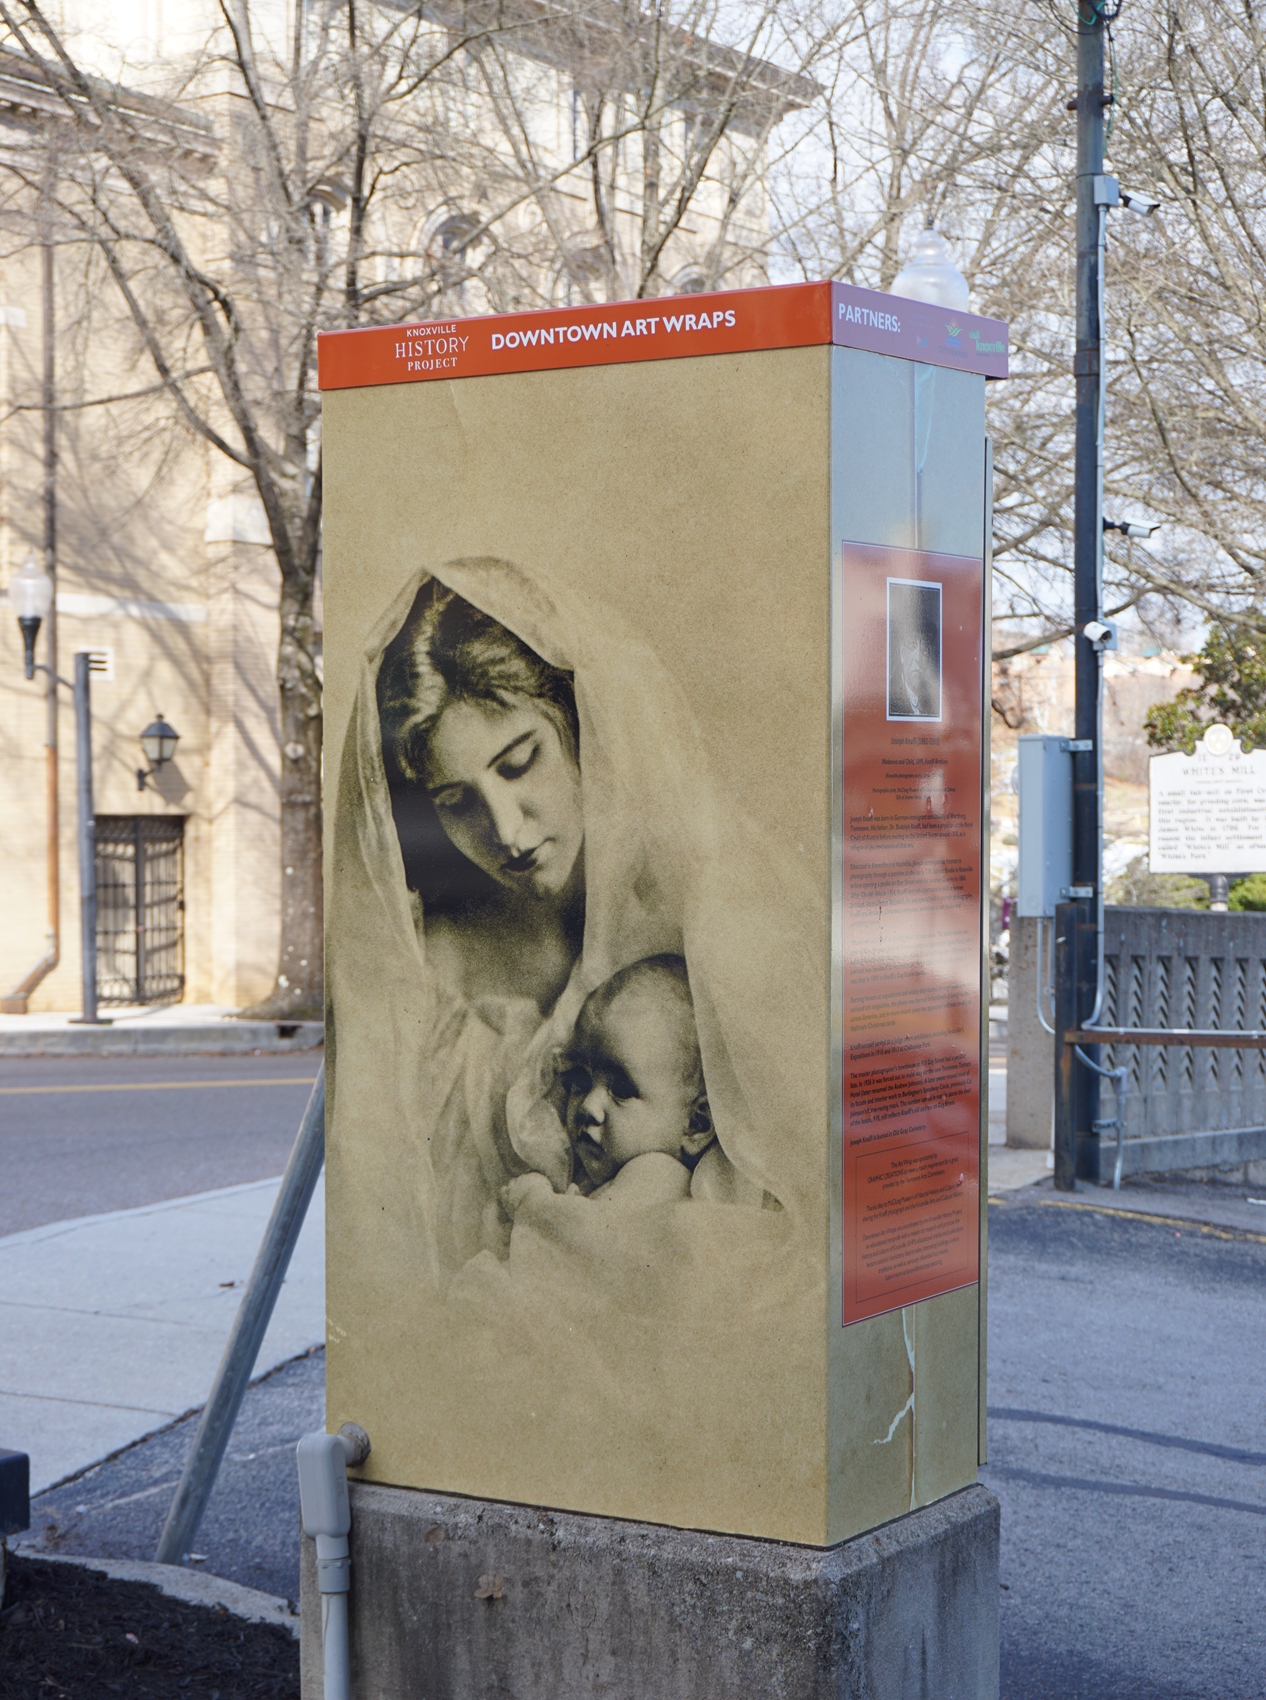 Madonna and Child, 1899 by Joseph Knaffl sponsored by Graphic Creations